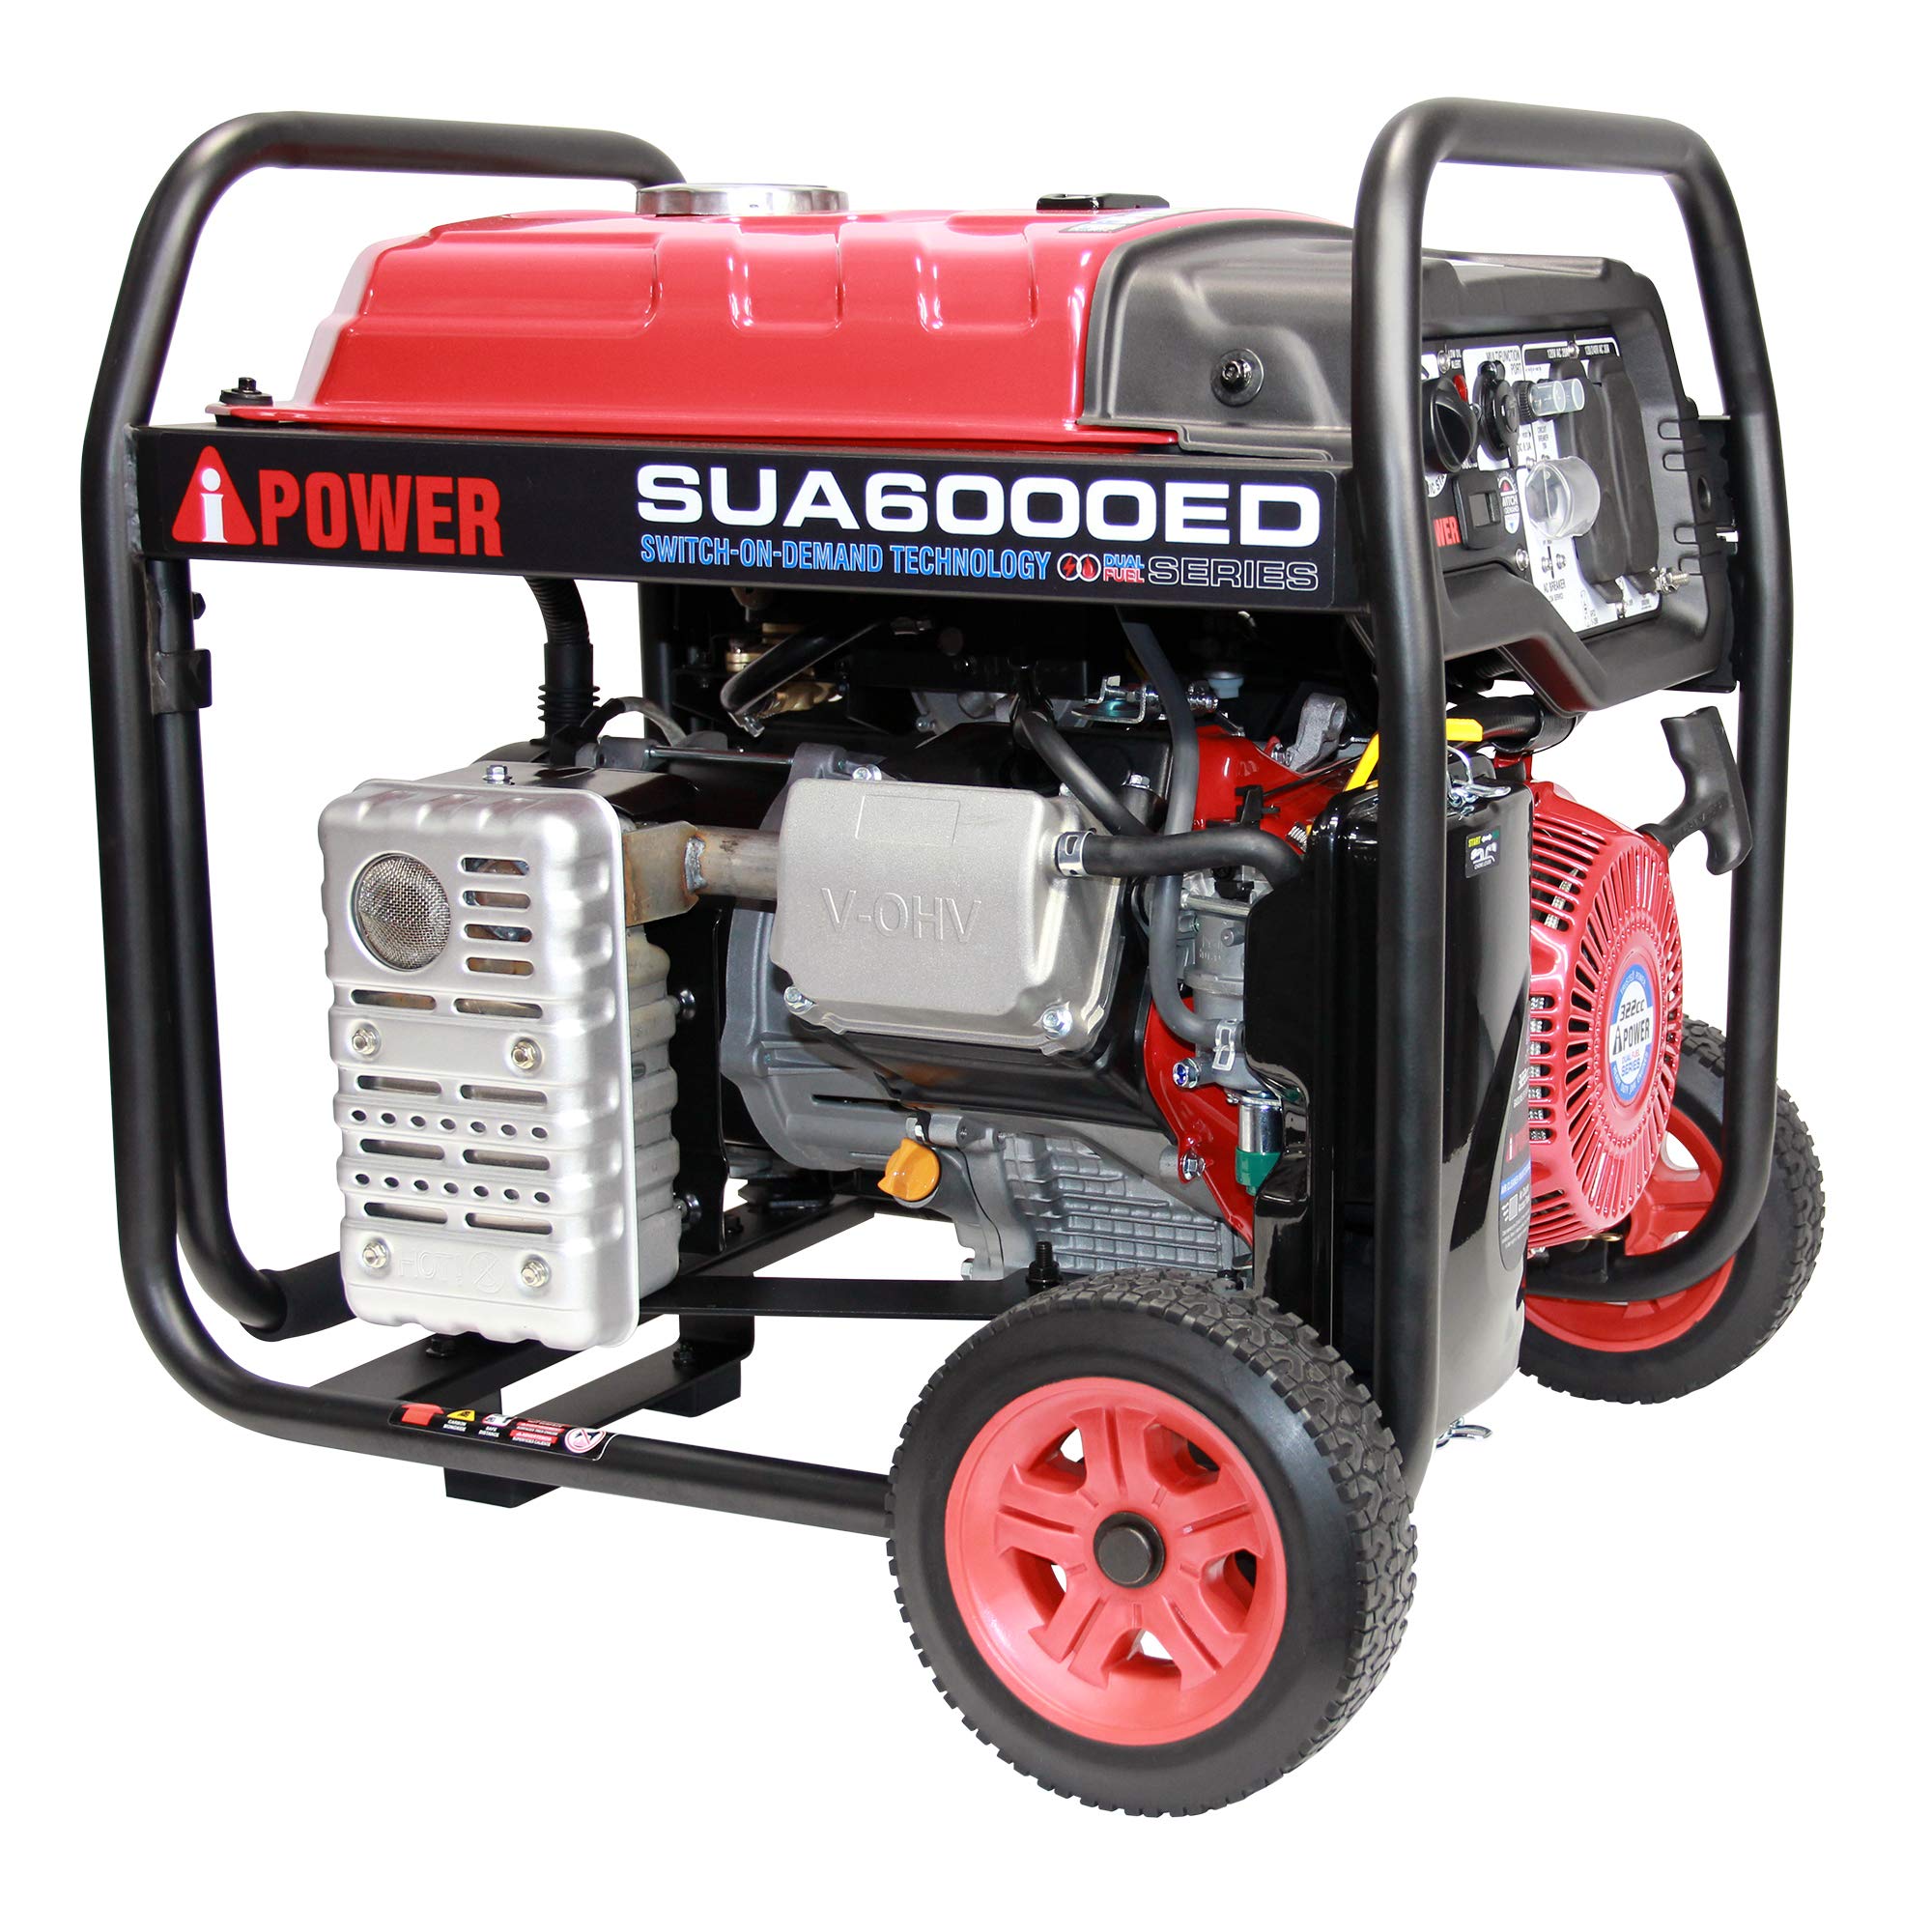 Restored Scratch and Dent A-iPower SUA6000ED 6000 Watt Portable Generator Gas & Propane Powered With Electric Start, Jobsite, RV, and Home Backup Emergency (Refurbished)